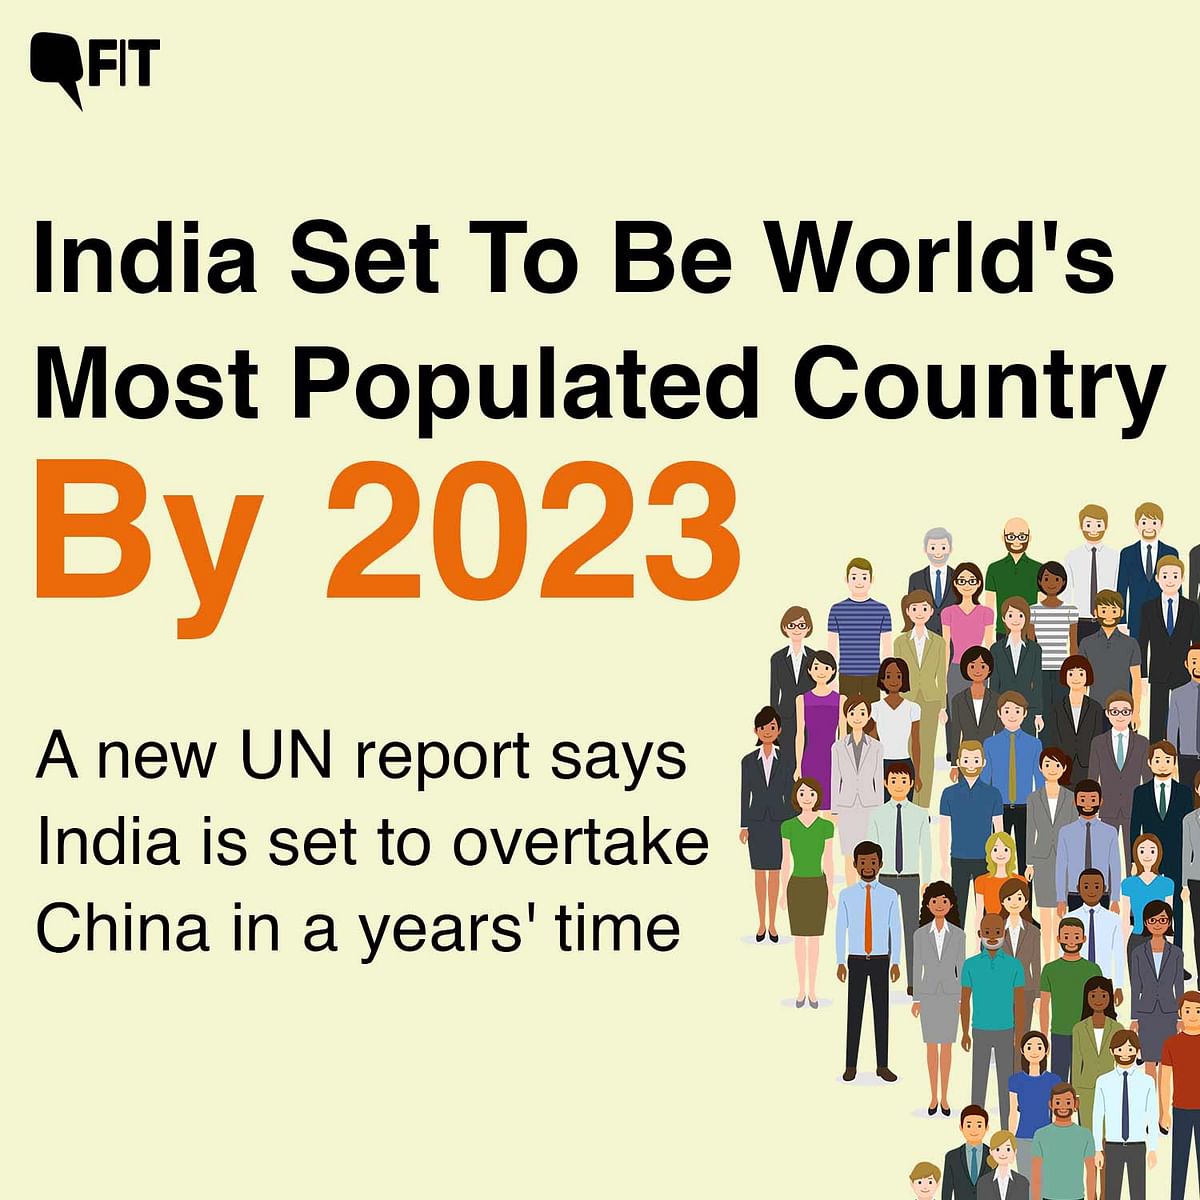 India's population will soon overtake China's, as per the UN report, but at the cost of female fertility.